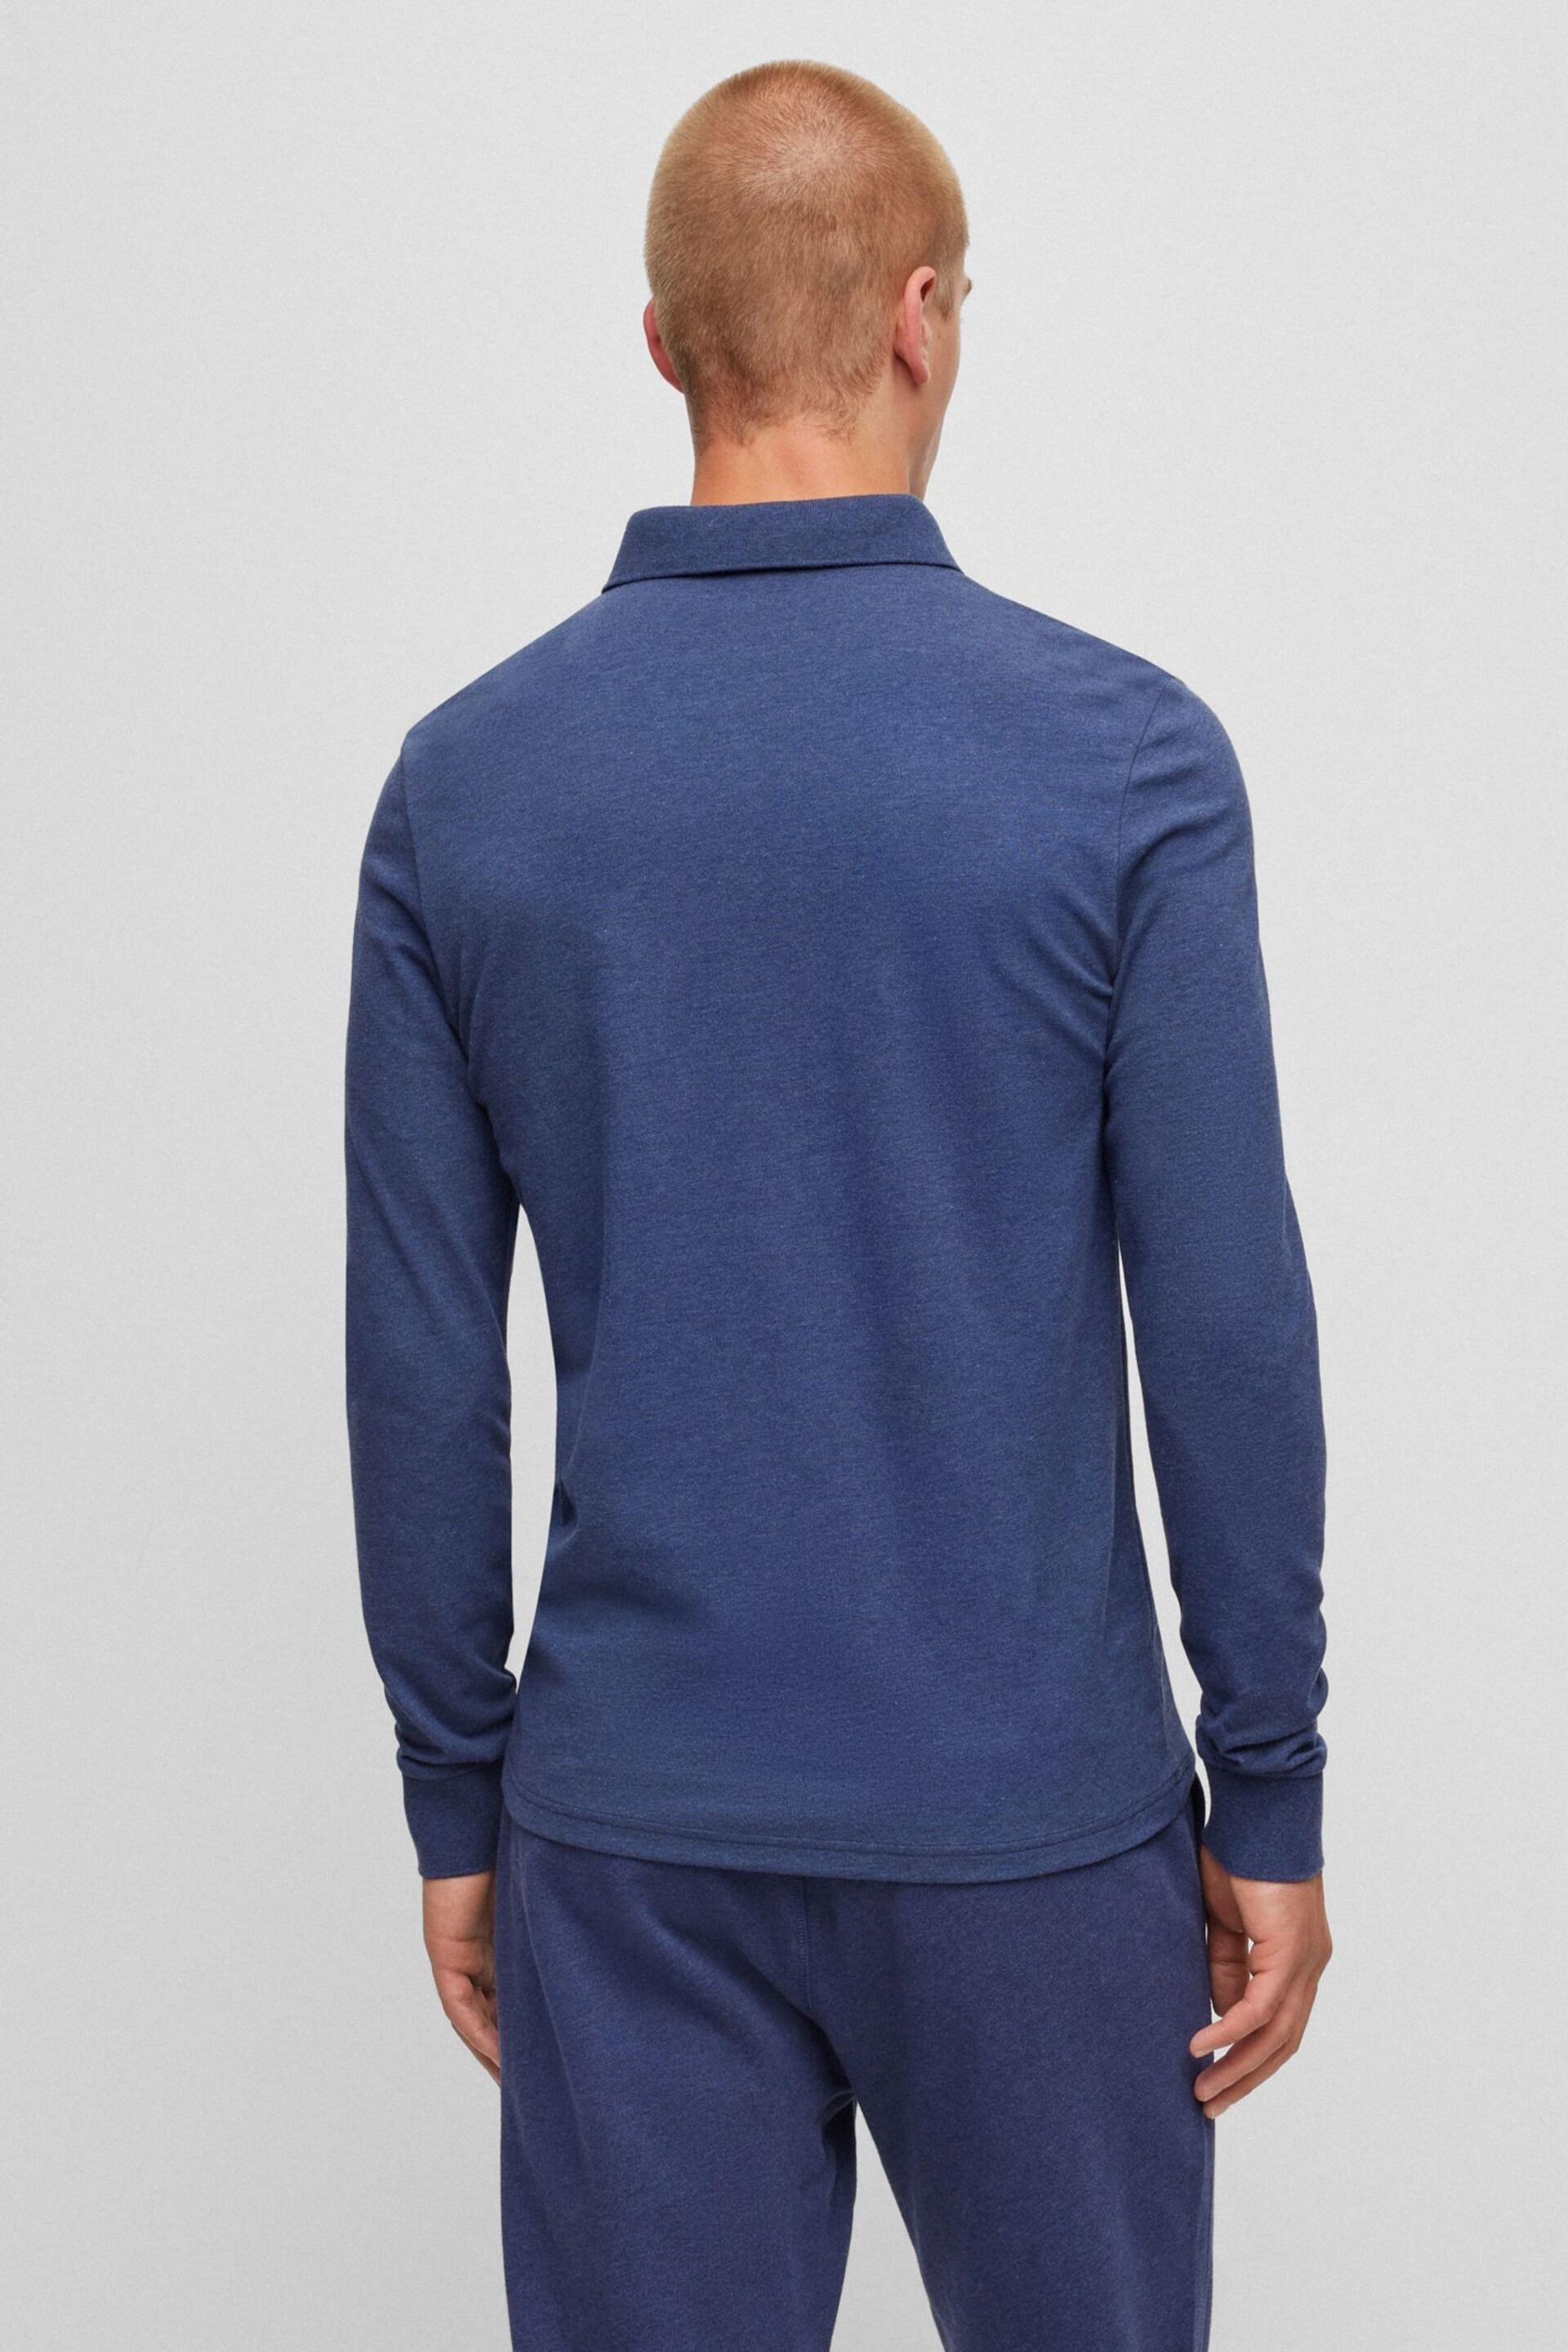 BOSS Blue Passerby Polo Shirt - Image 3 of 6